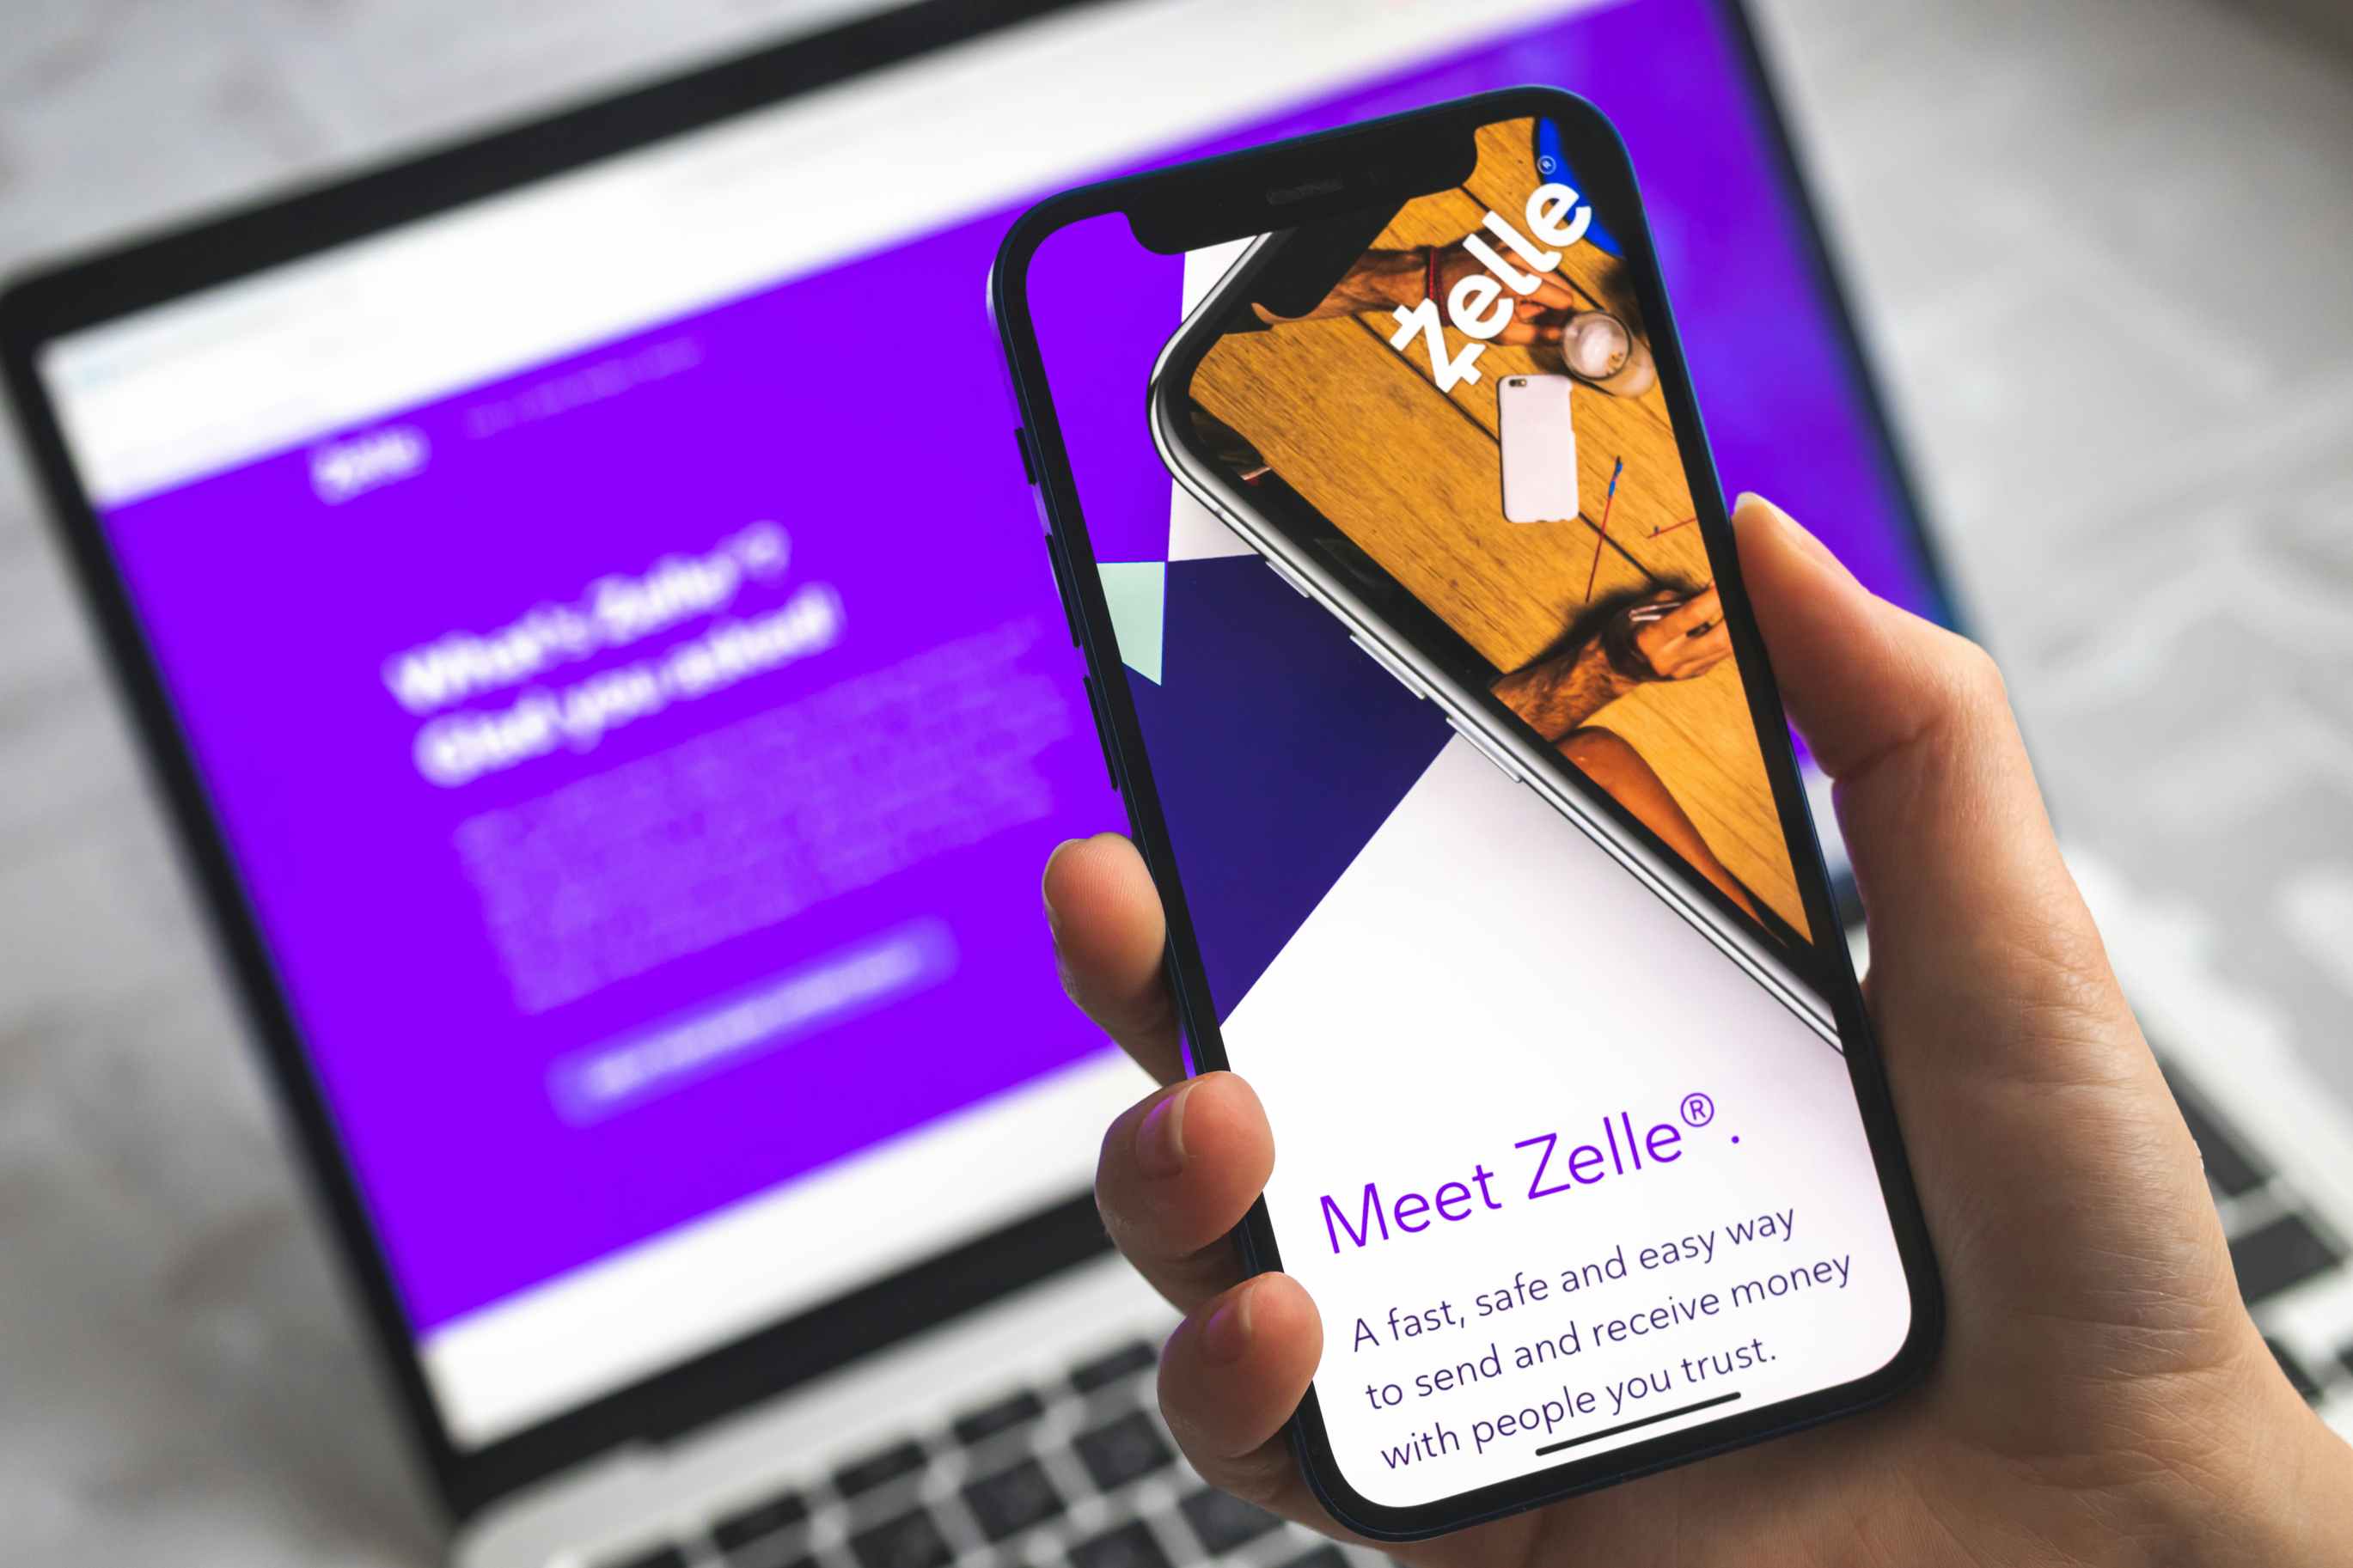 Person holding a cell phone with the Zelle payment app displayed, in front of a laptop with Zelle on it.